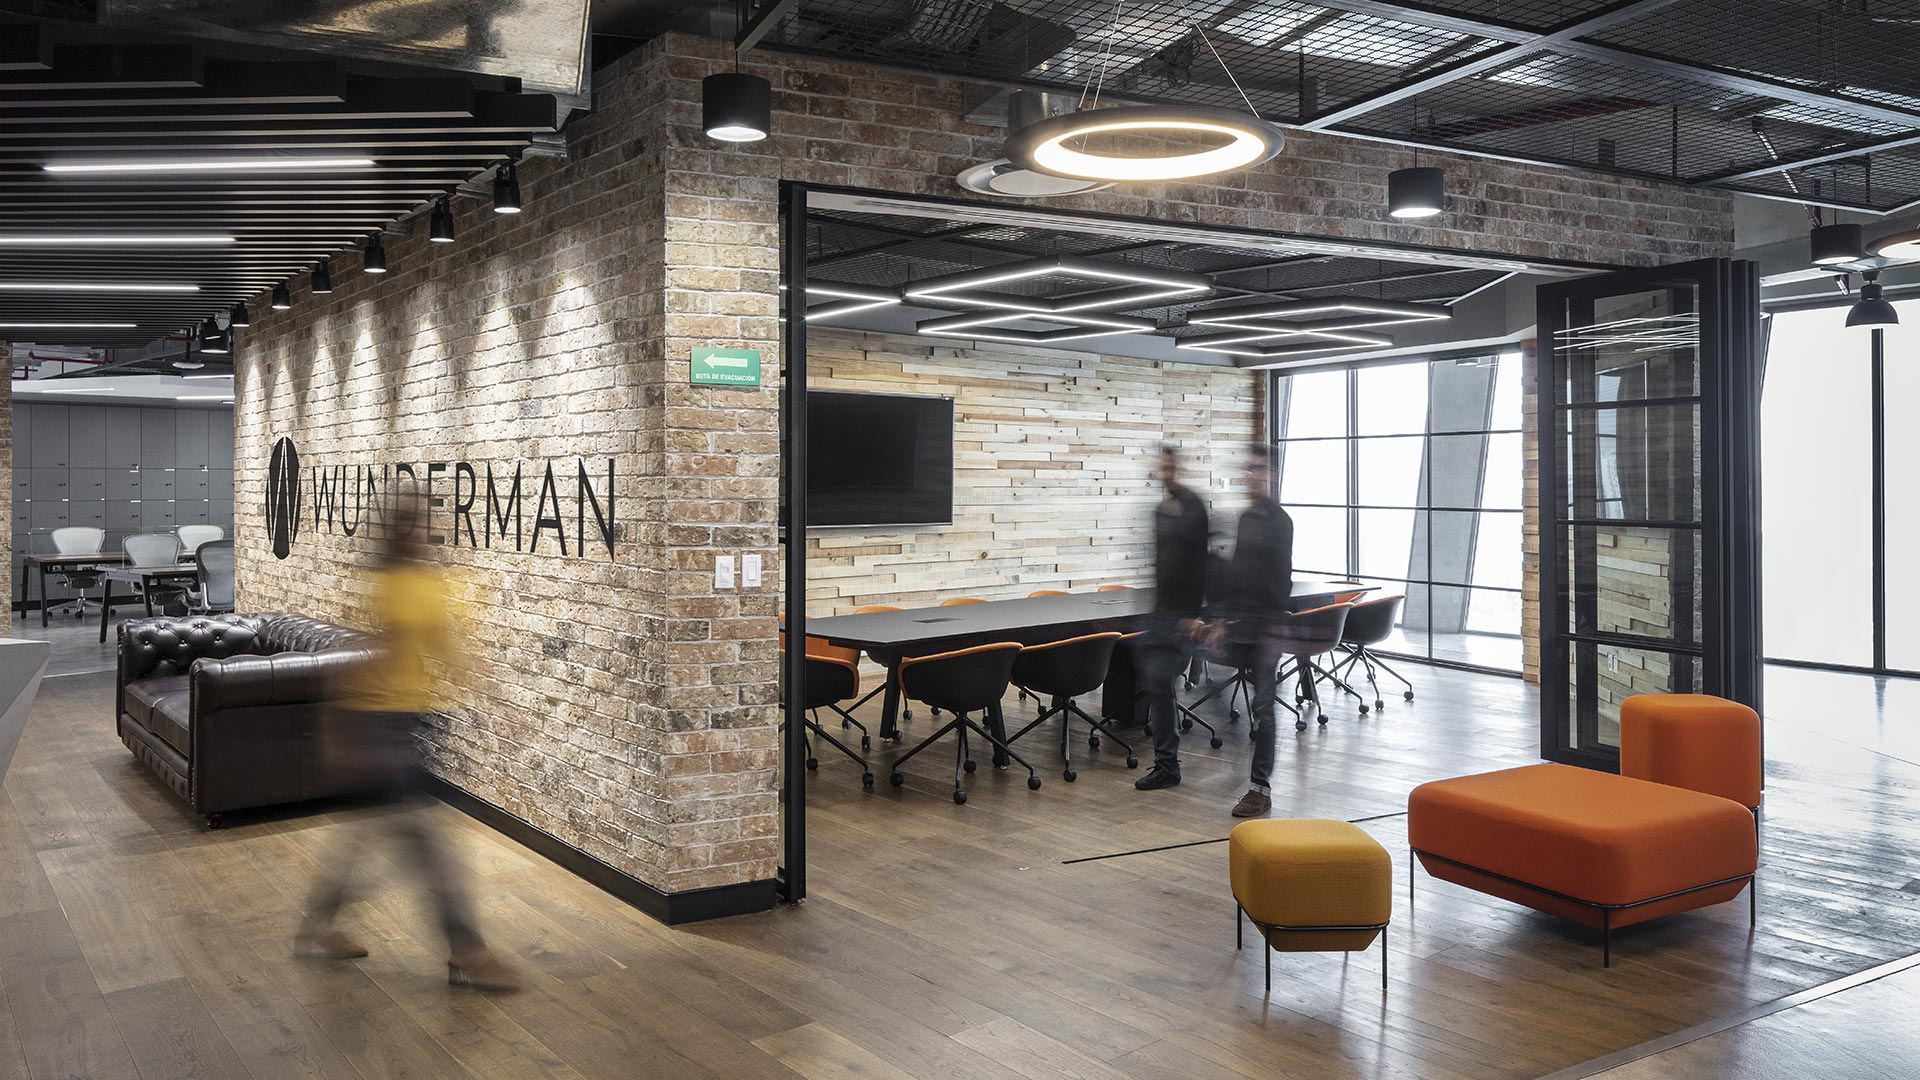 Wunderman Offices - Mexico City | Office Snapshots